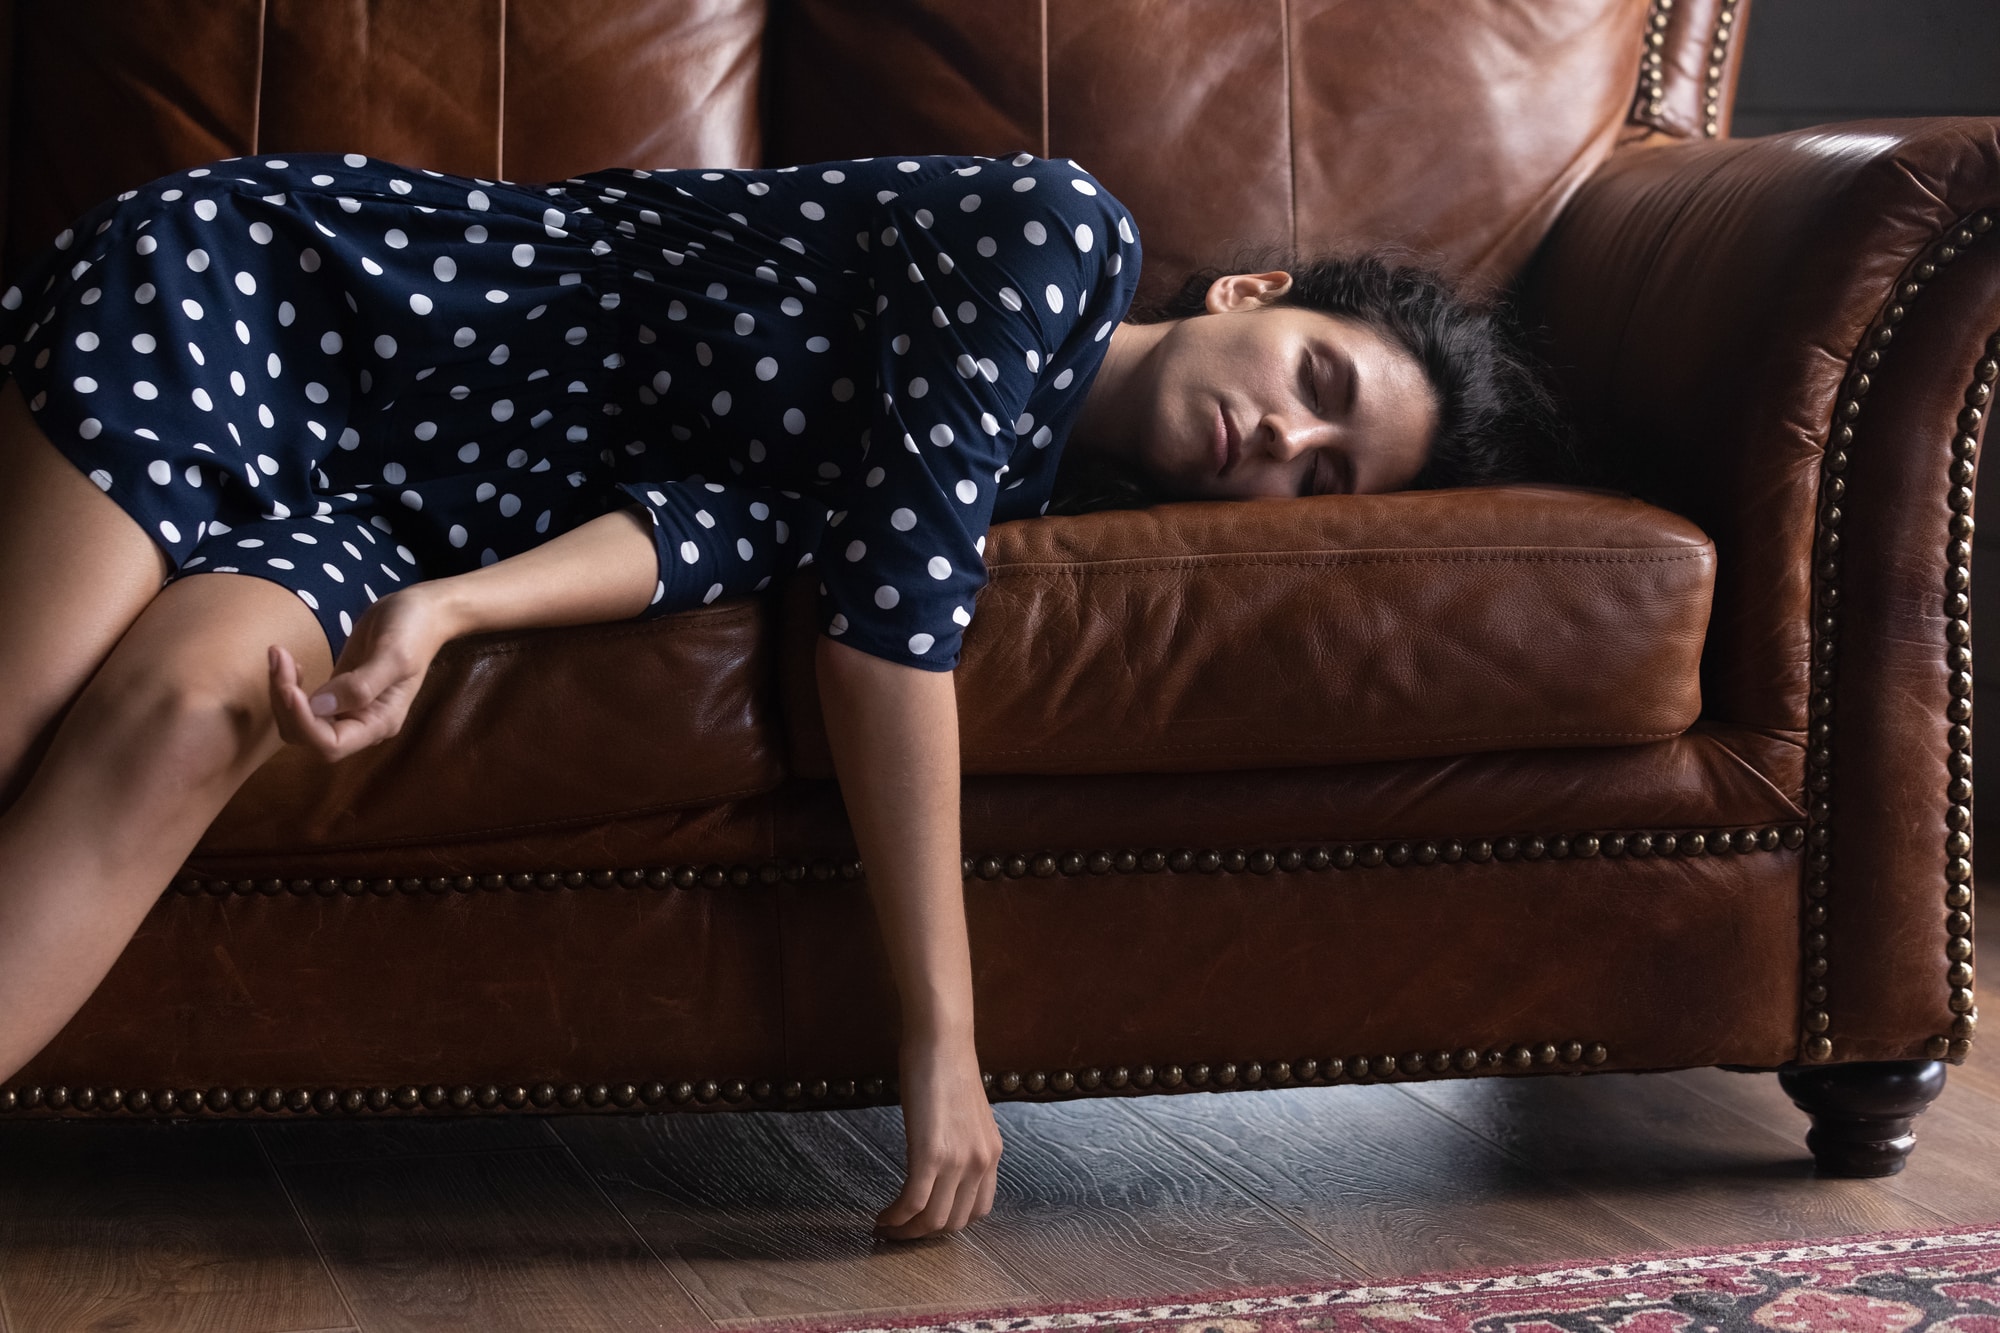 Exhausted Hispanic woman resting on comfortable leather couch